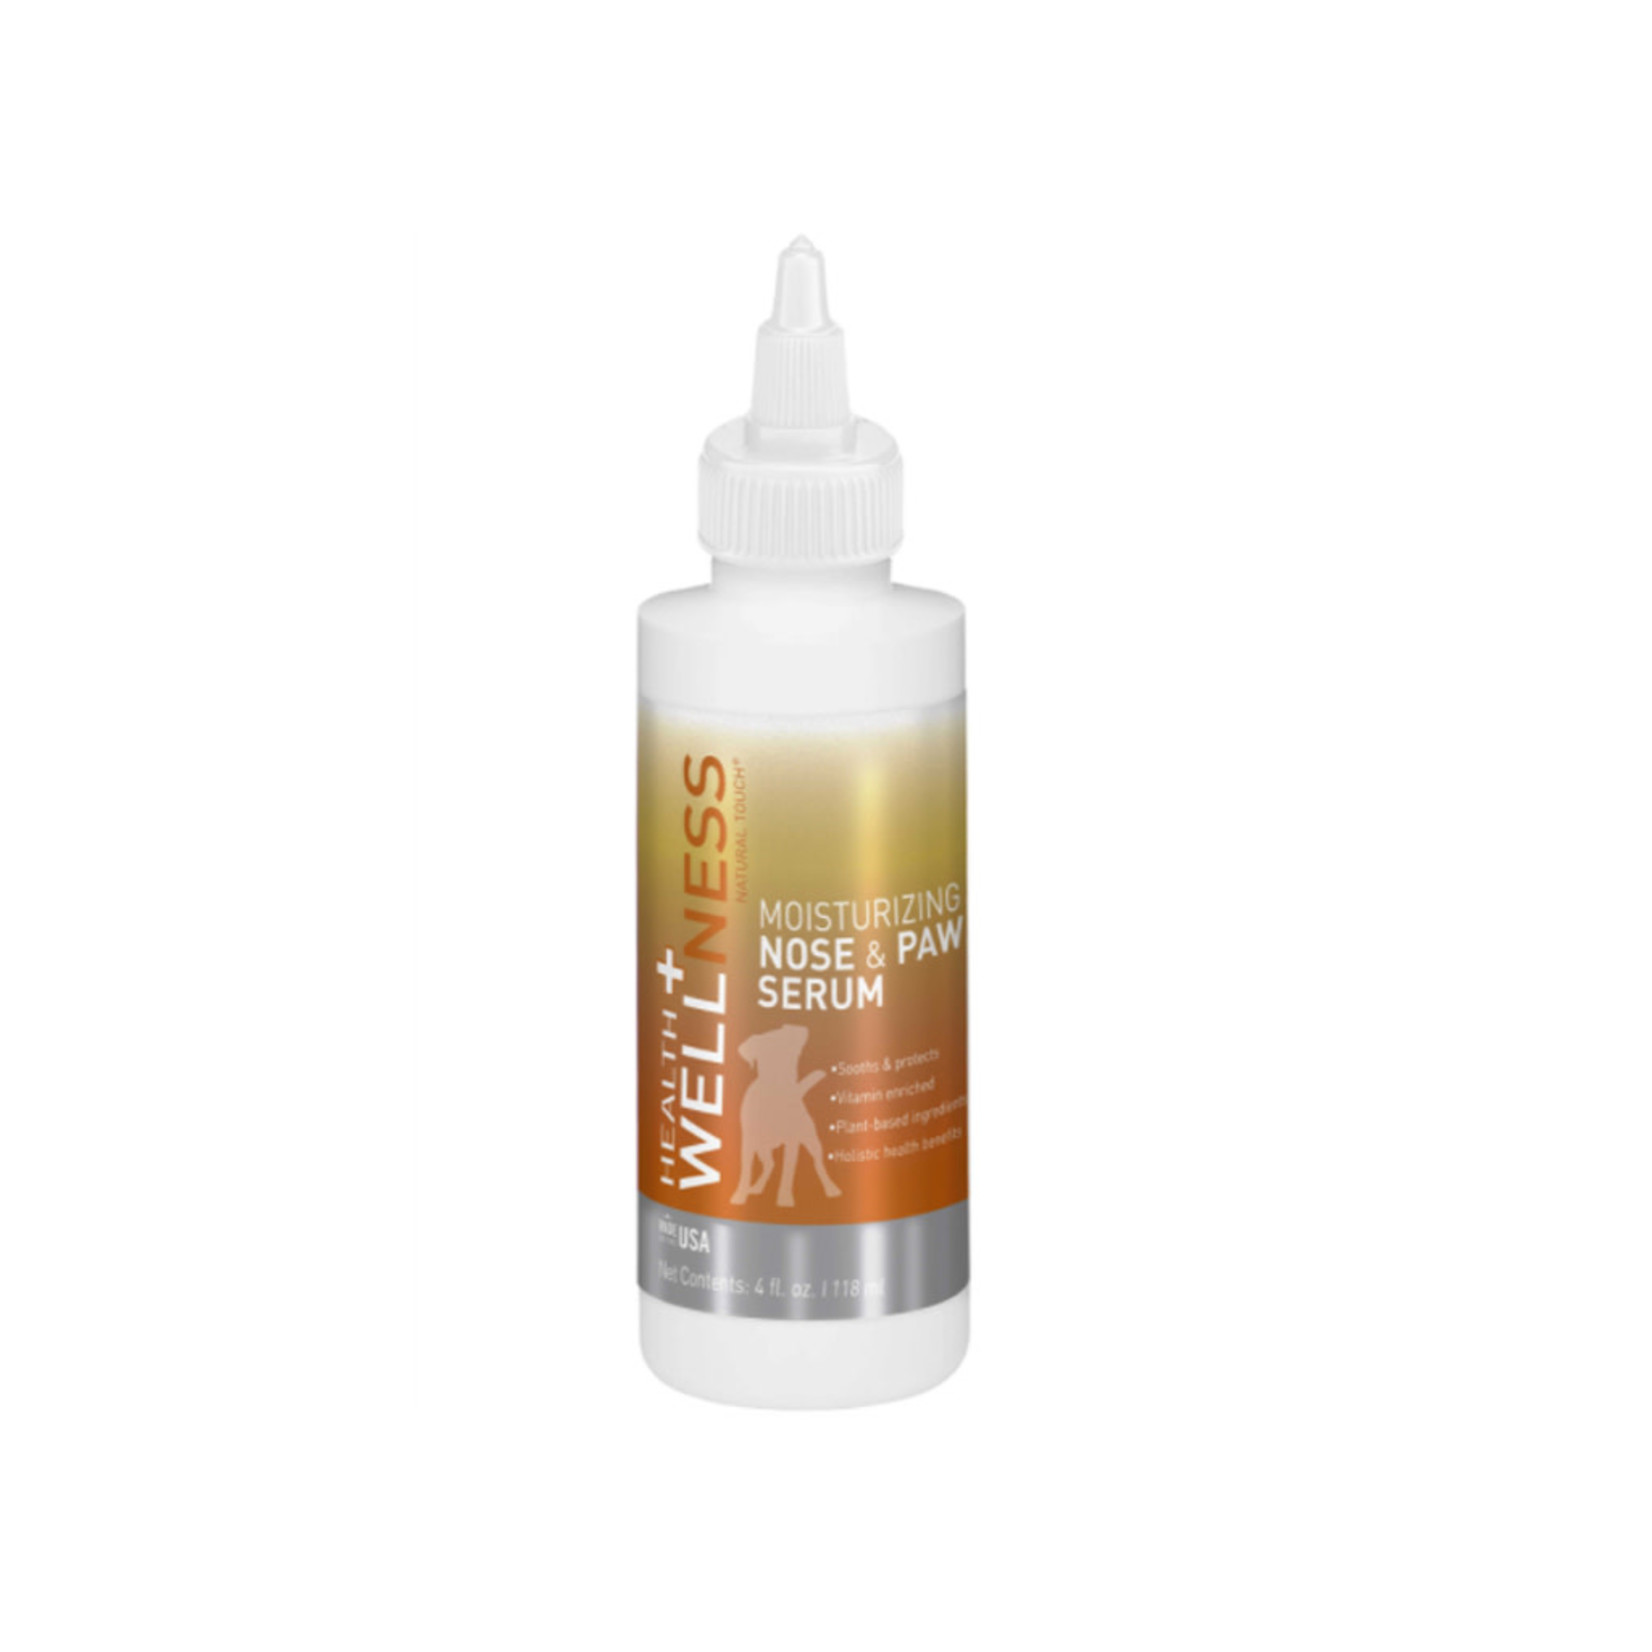 Natural touch Nose & Paw Serum 4OZ